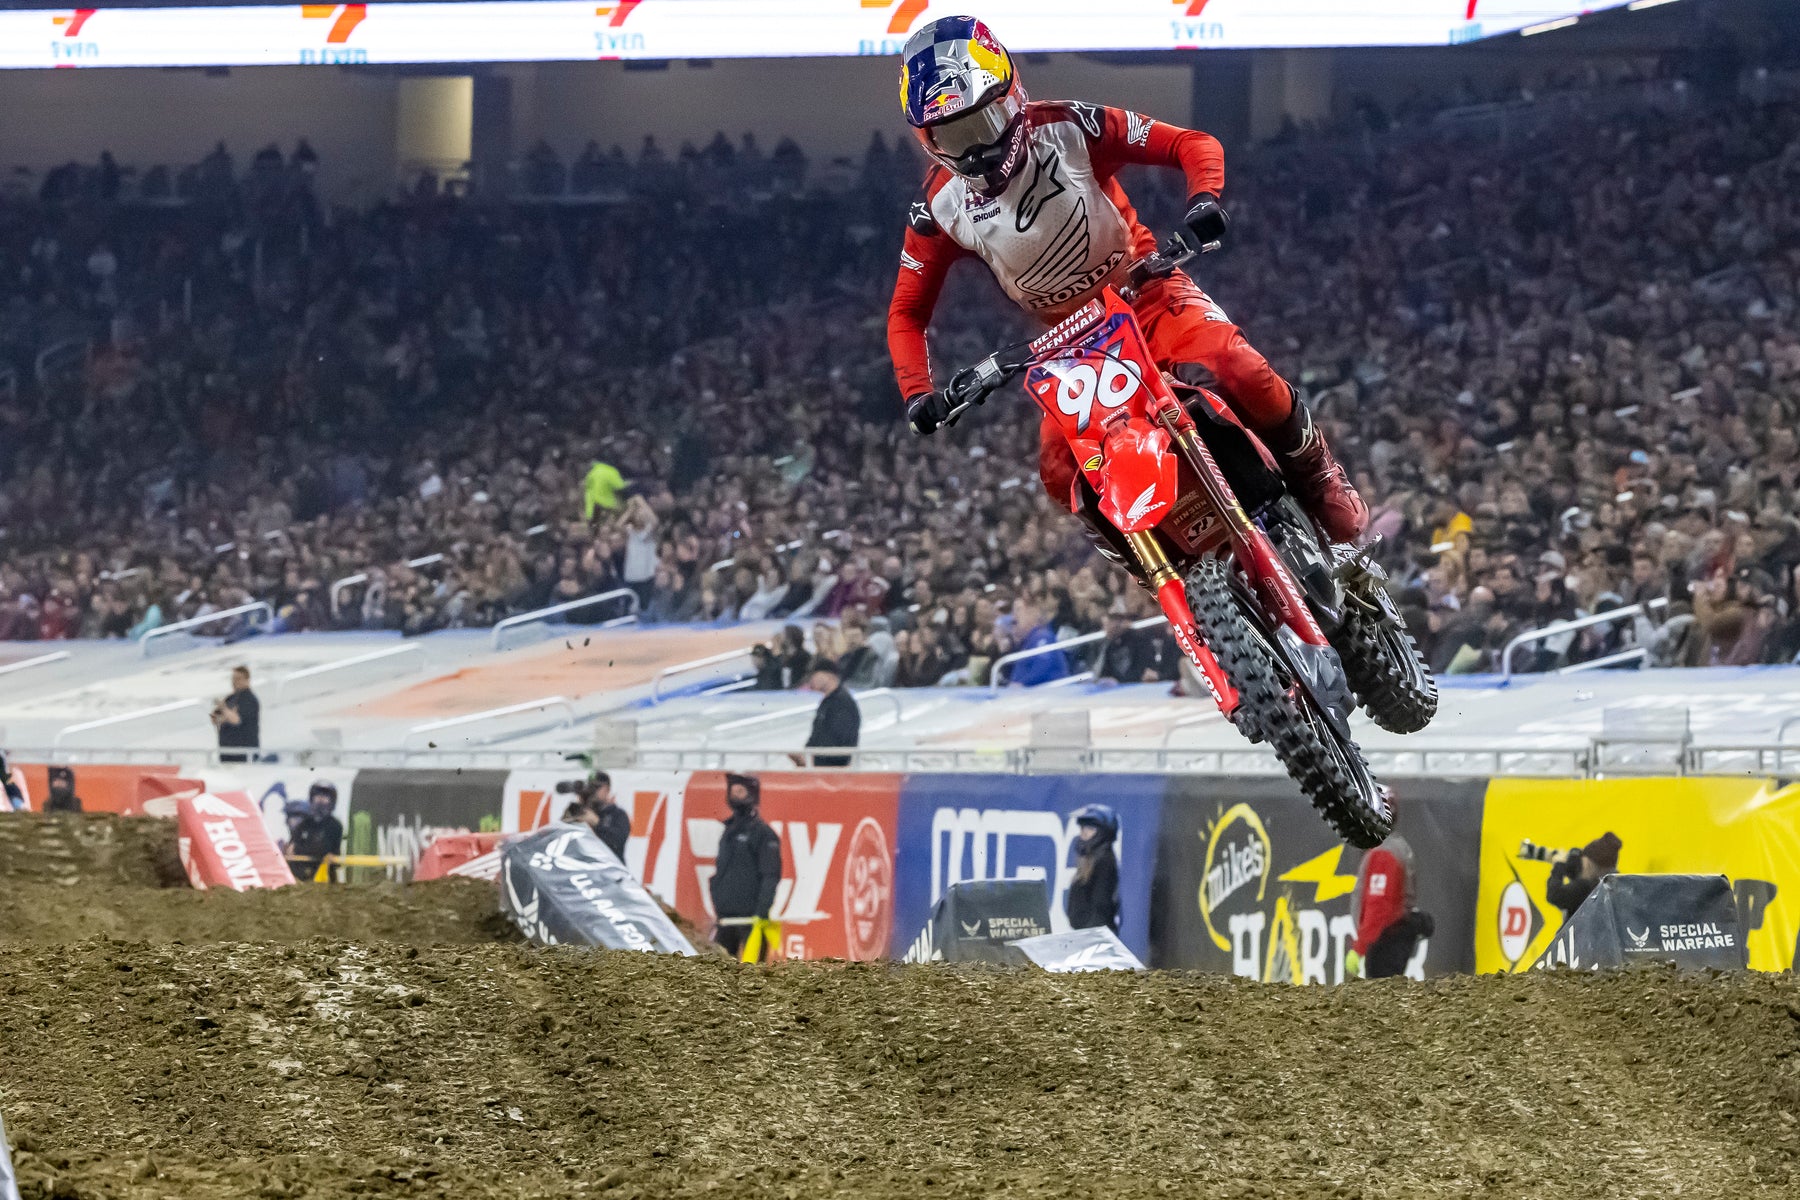 ALPINESTARS PODIUM LOCK-OUT AS UNTOUCHABLE HUNTER LAWRENCE TRIUMPHS IN 250SX RACES